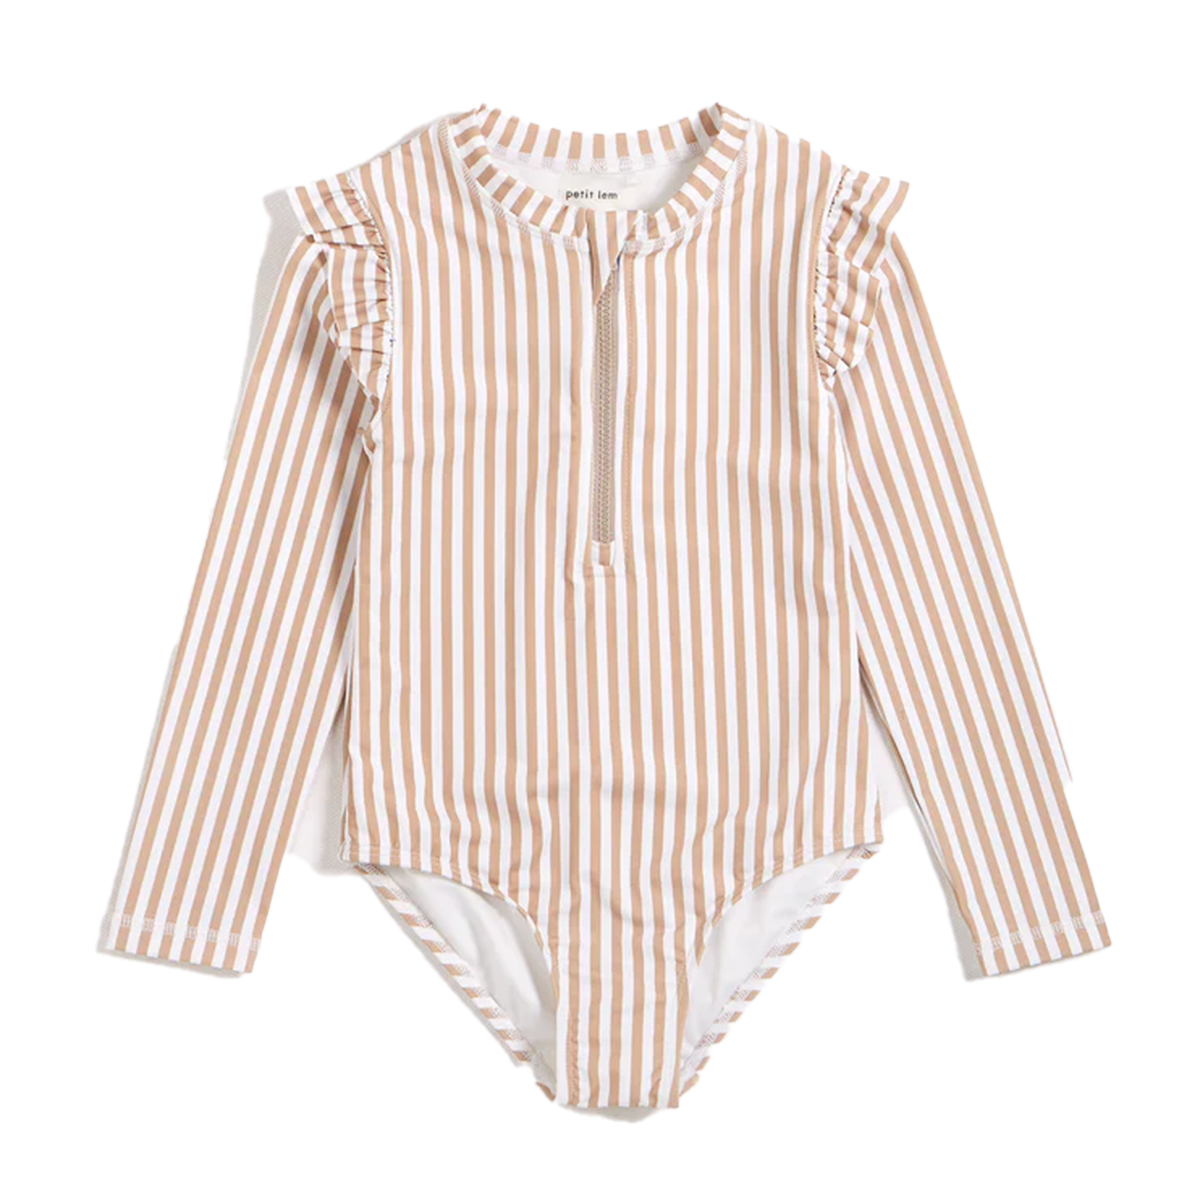 Khaki Striped Toddler Girl's One-Piece Long Sleeve Swimsuit